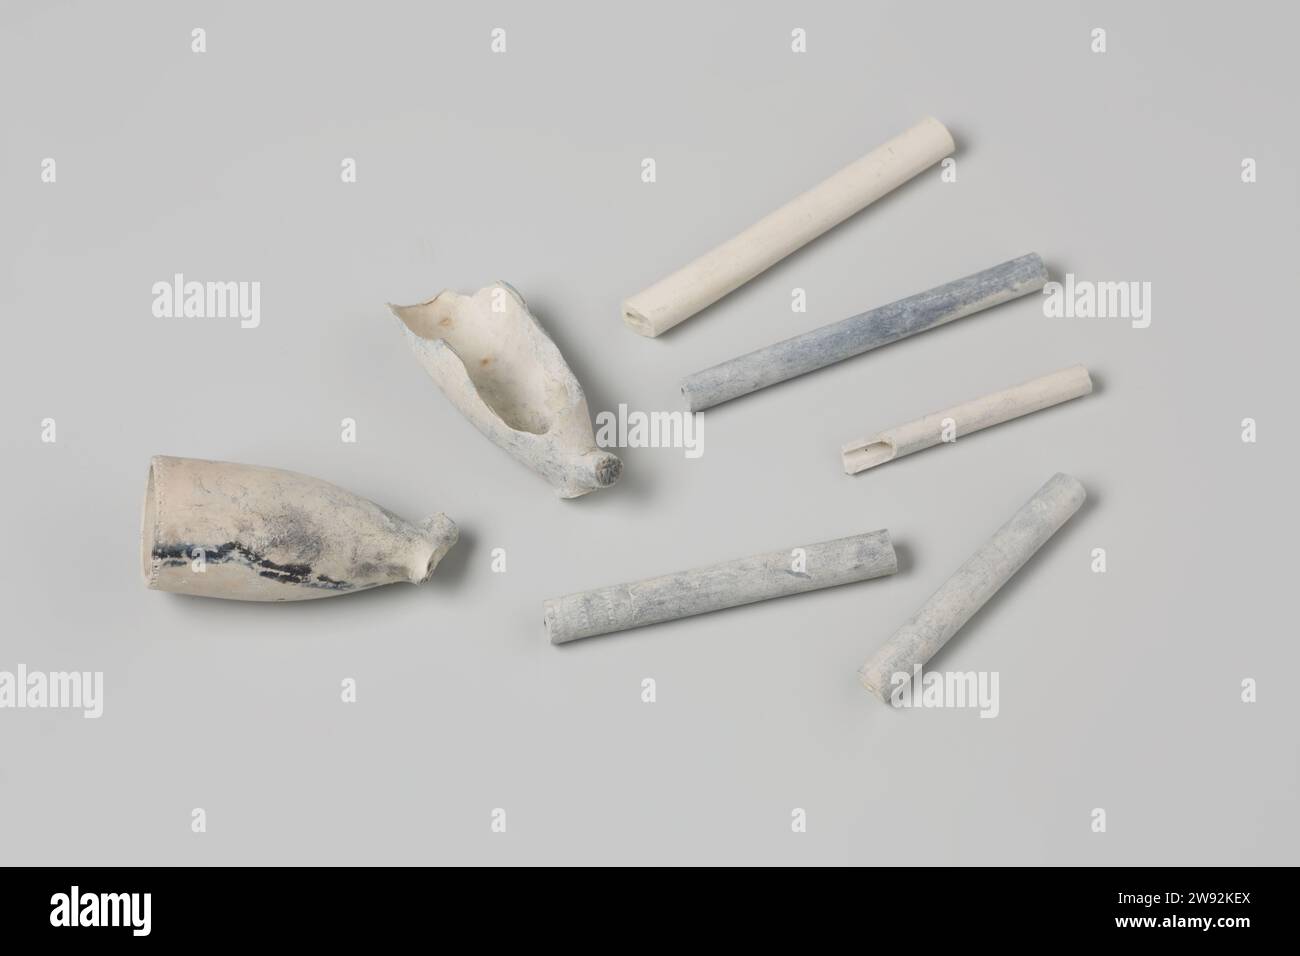 Fragments of pipe heads and pipes from the wreck of the East Indians' t Vliegend Hart, WS, 1700 - 1735  Two heads of earthen Goudse pipes: both heeled with heel brand, one of which broken. Five pieces of stem. Fragments of Bowls and Stems. Gouda pipe clay Stock Photo